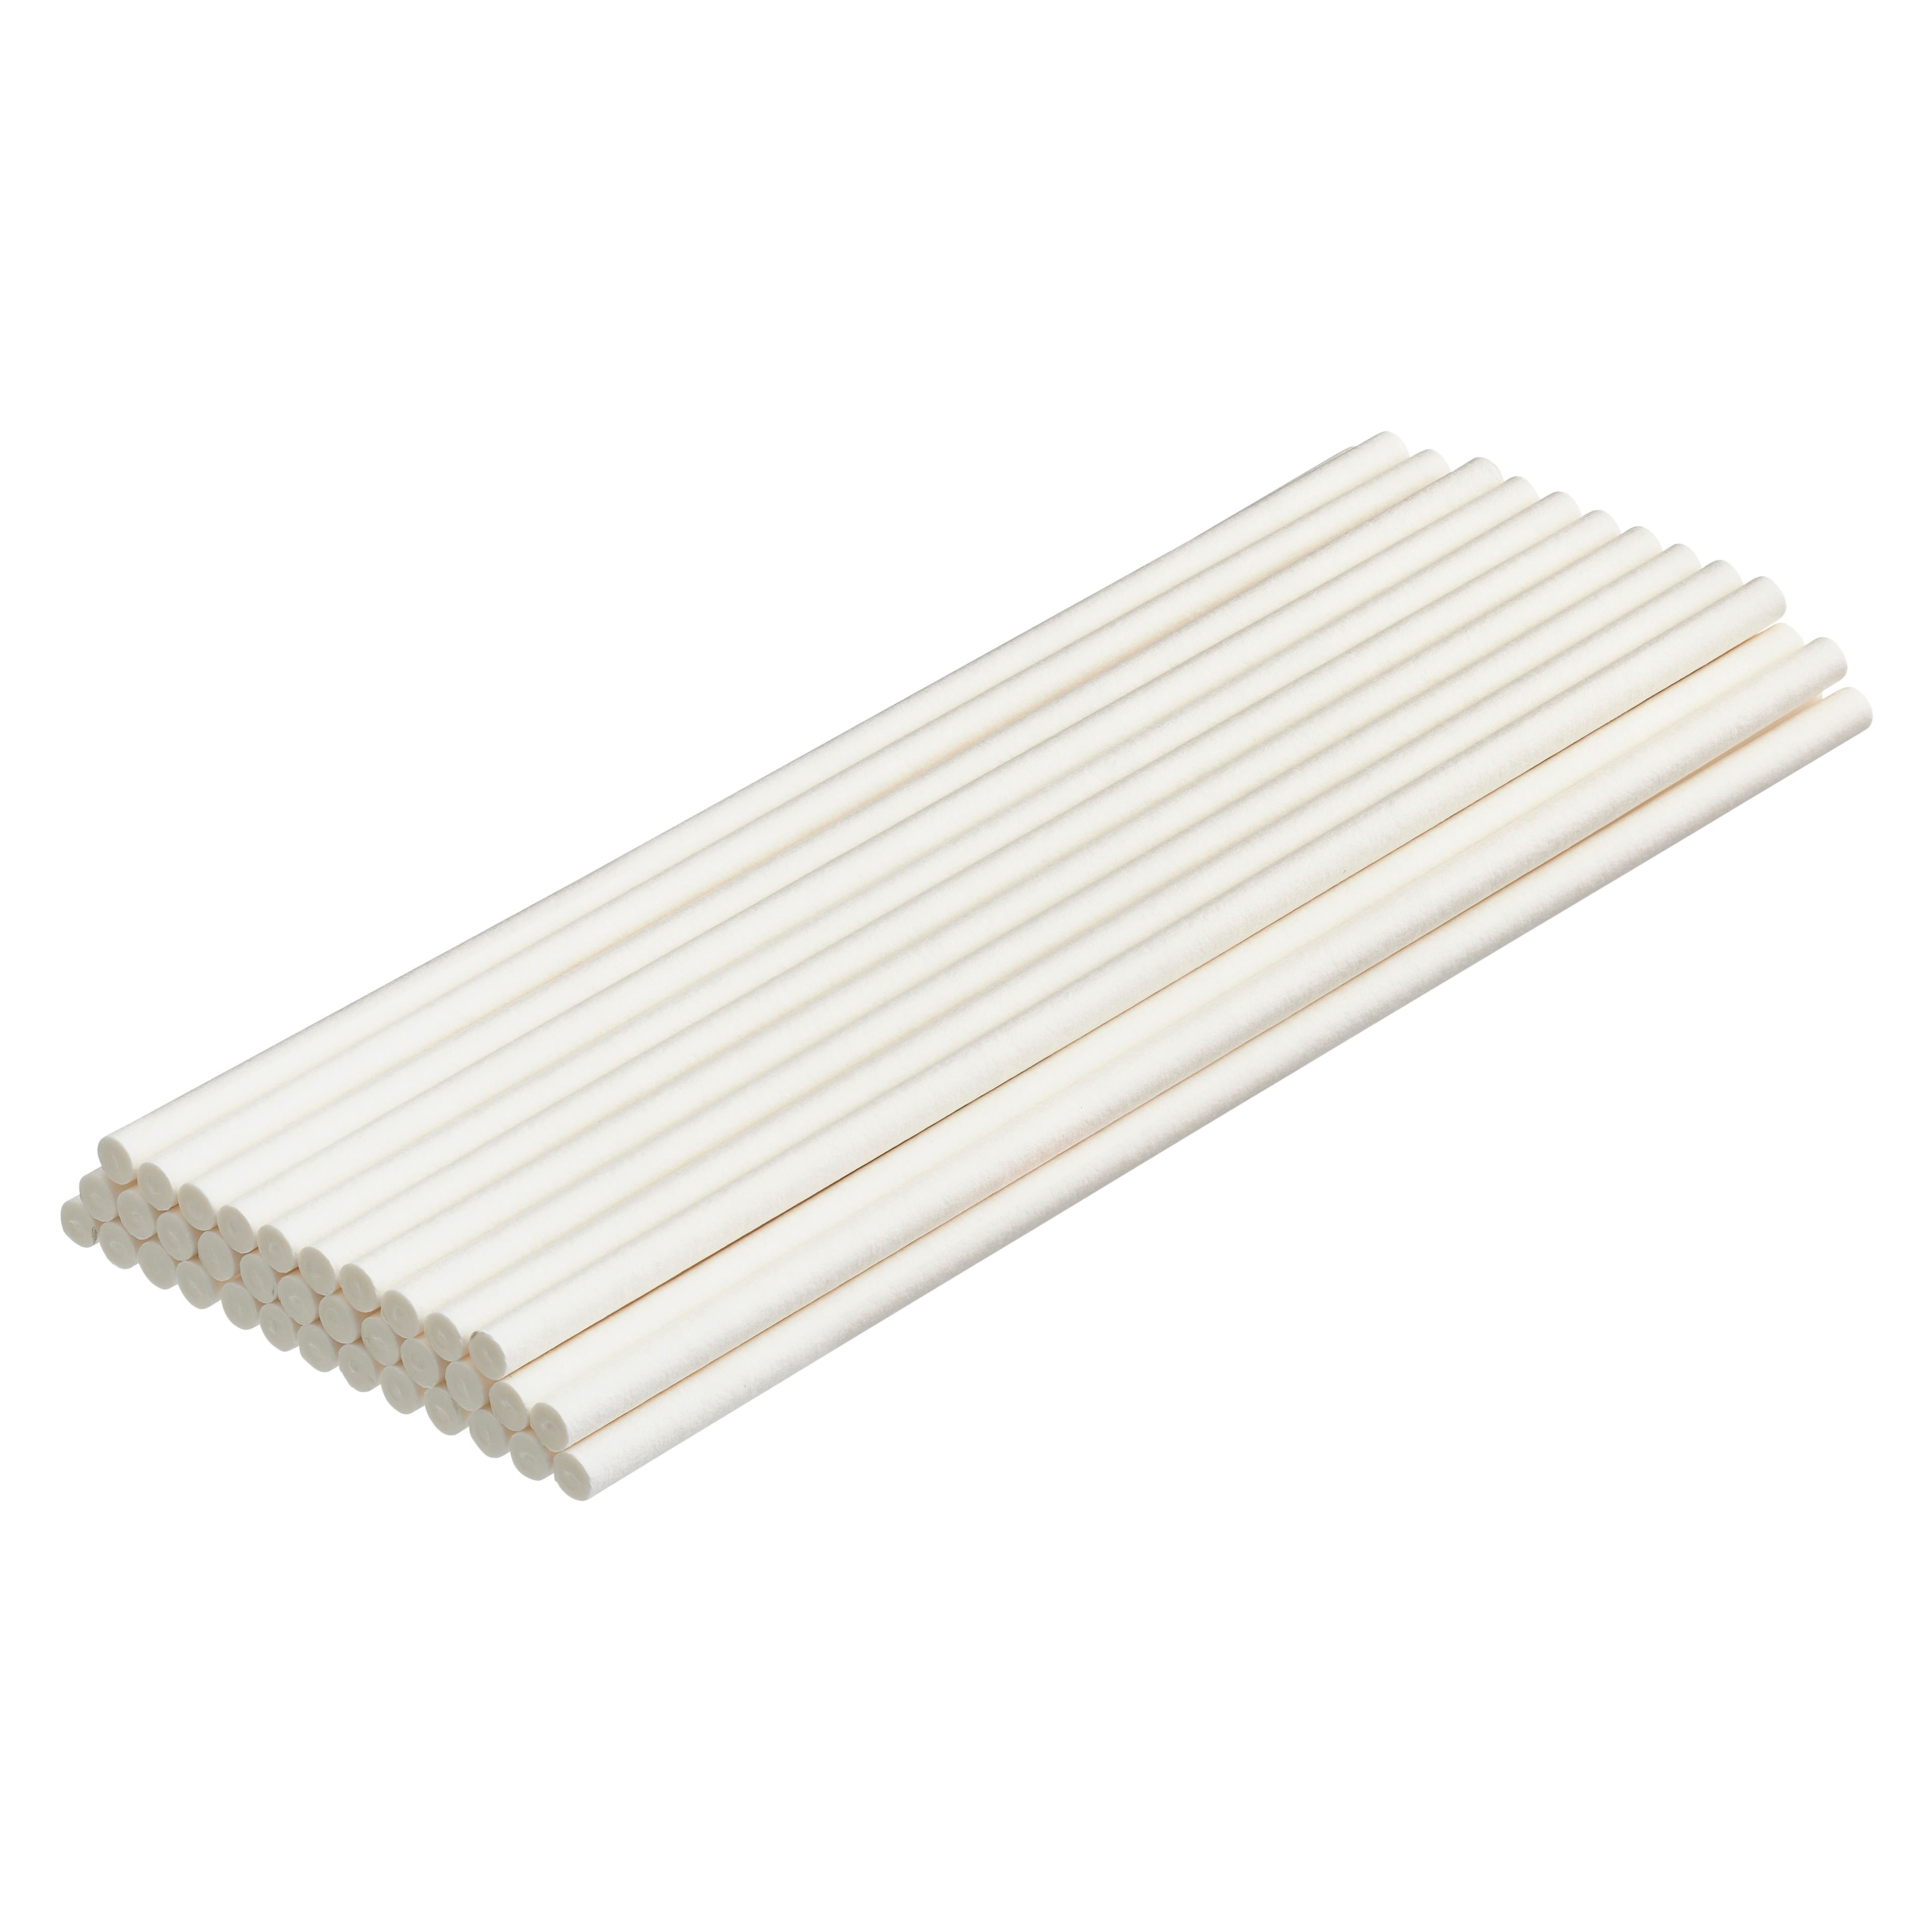 12 Packs: 6 ct. (72 total) Reusable Popsicle Sticks by Celebrate It™